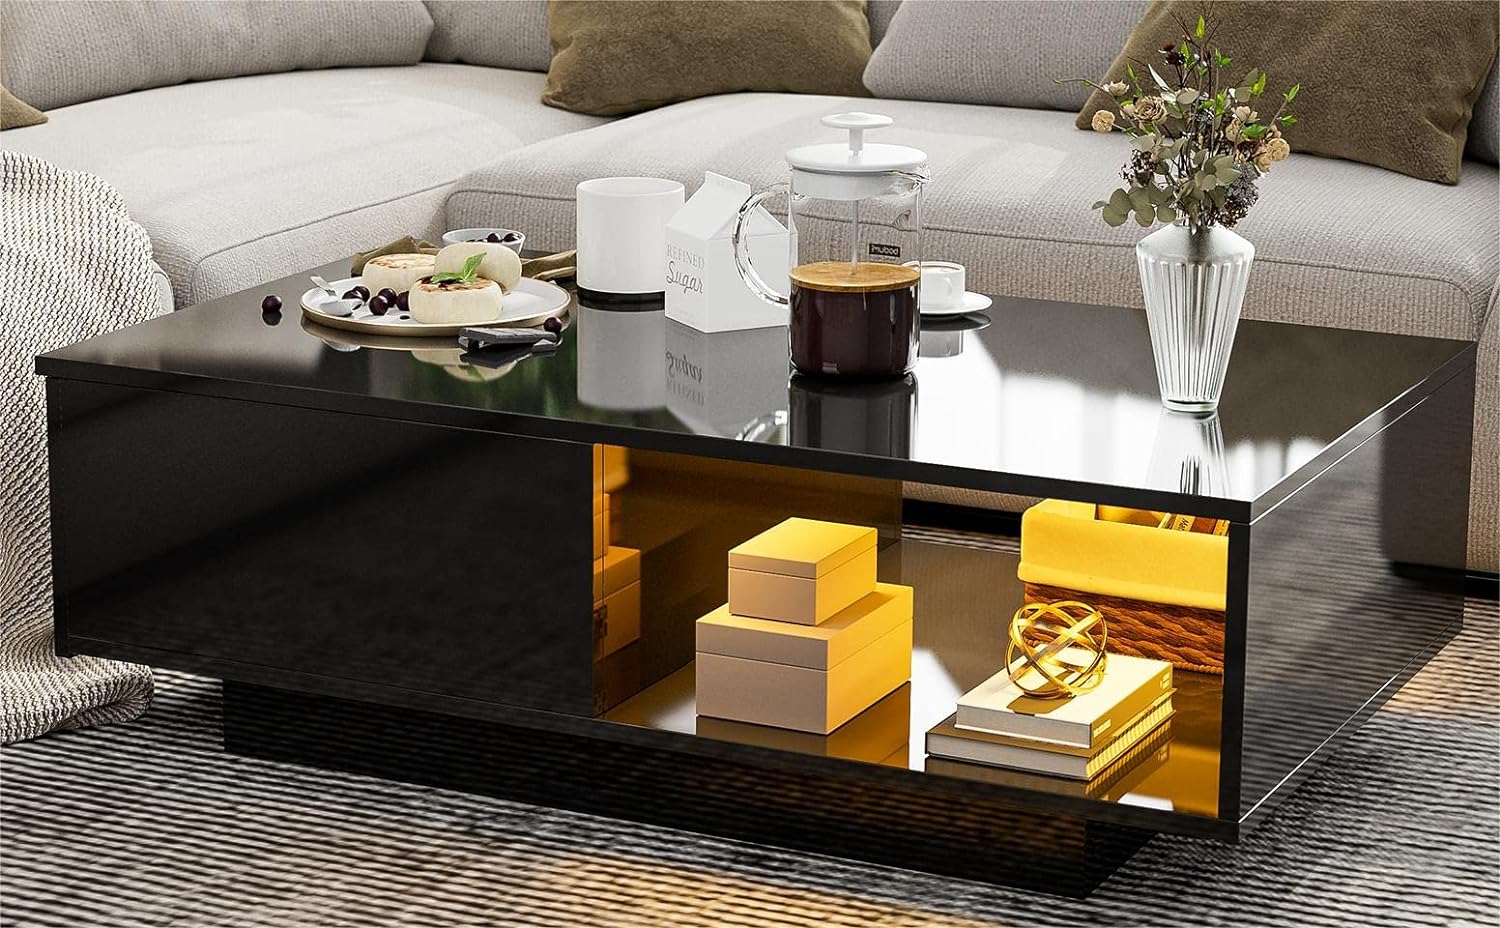 IKIFLY Modern High Glossy Coffee Table with 16 Colors LED Light, Rectangle Cocktail Coffee Table, LED End Table with Drawer for Home Living Room Office Furniture (Black)